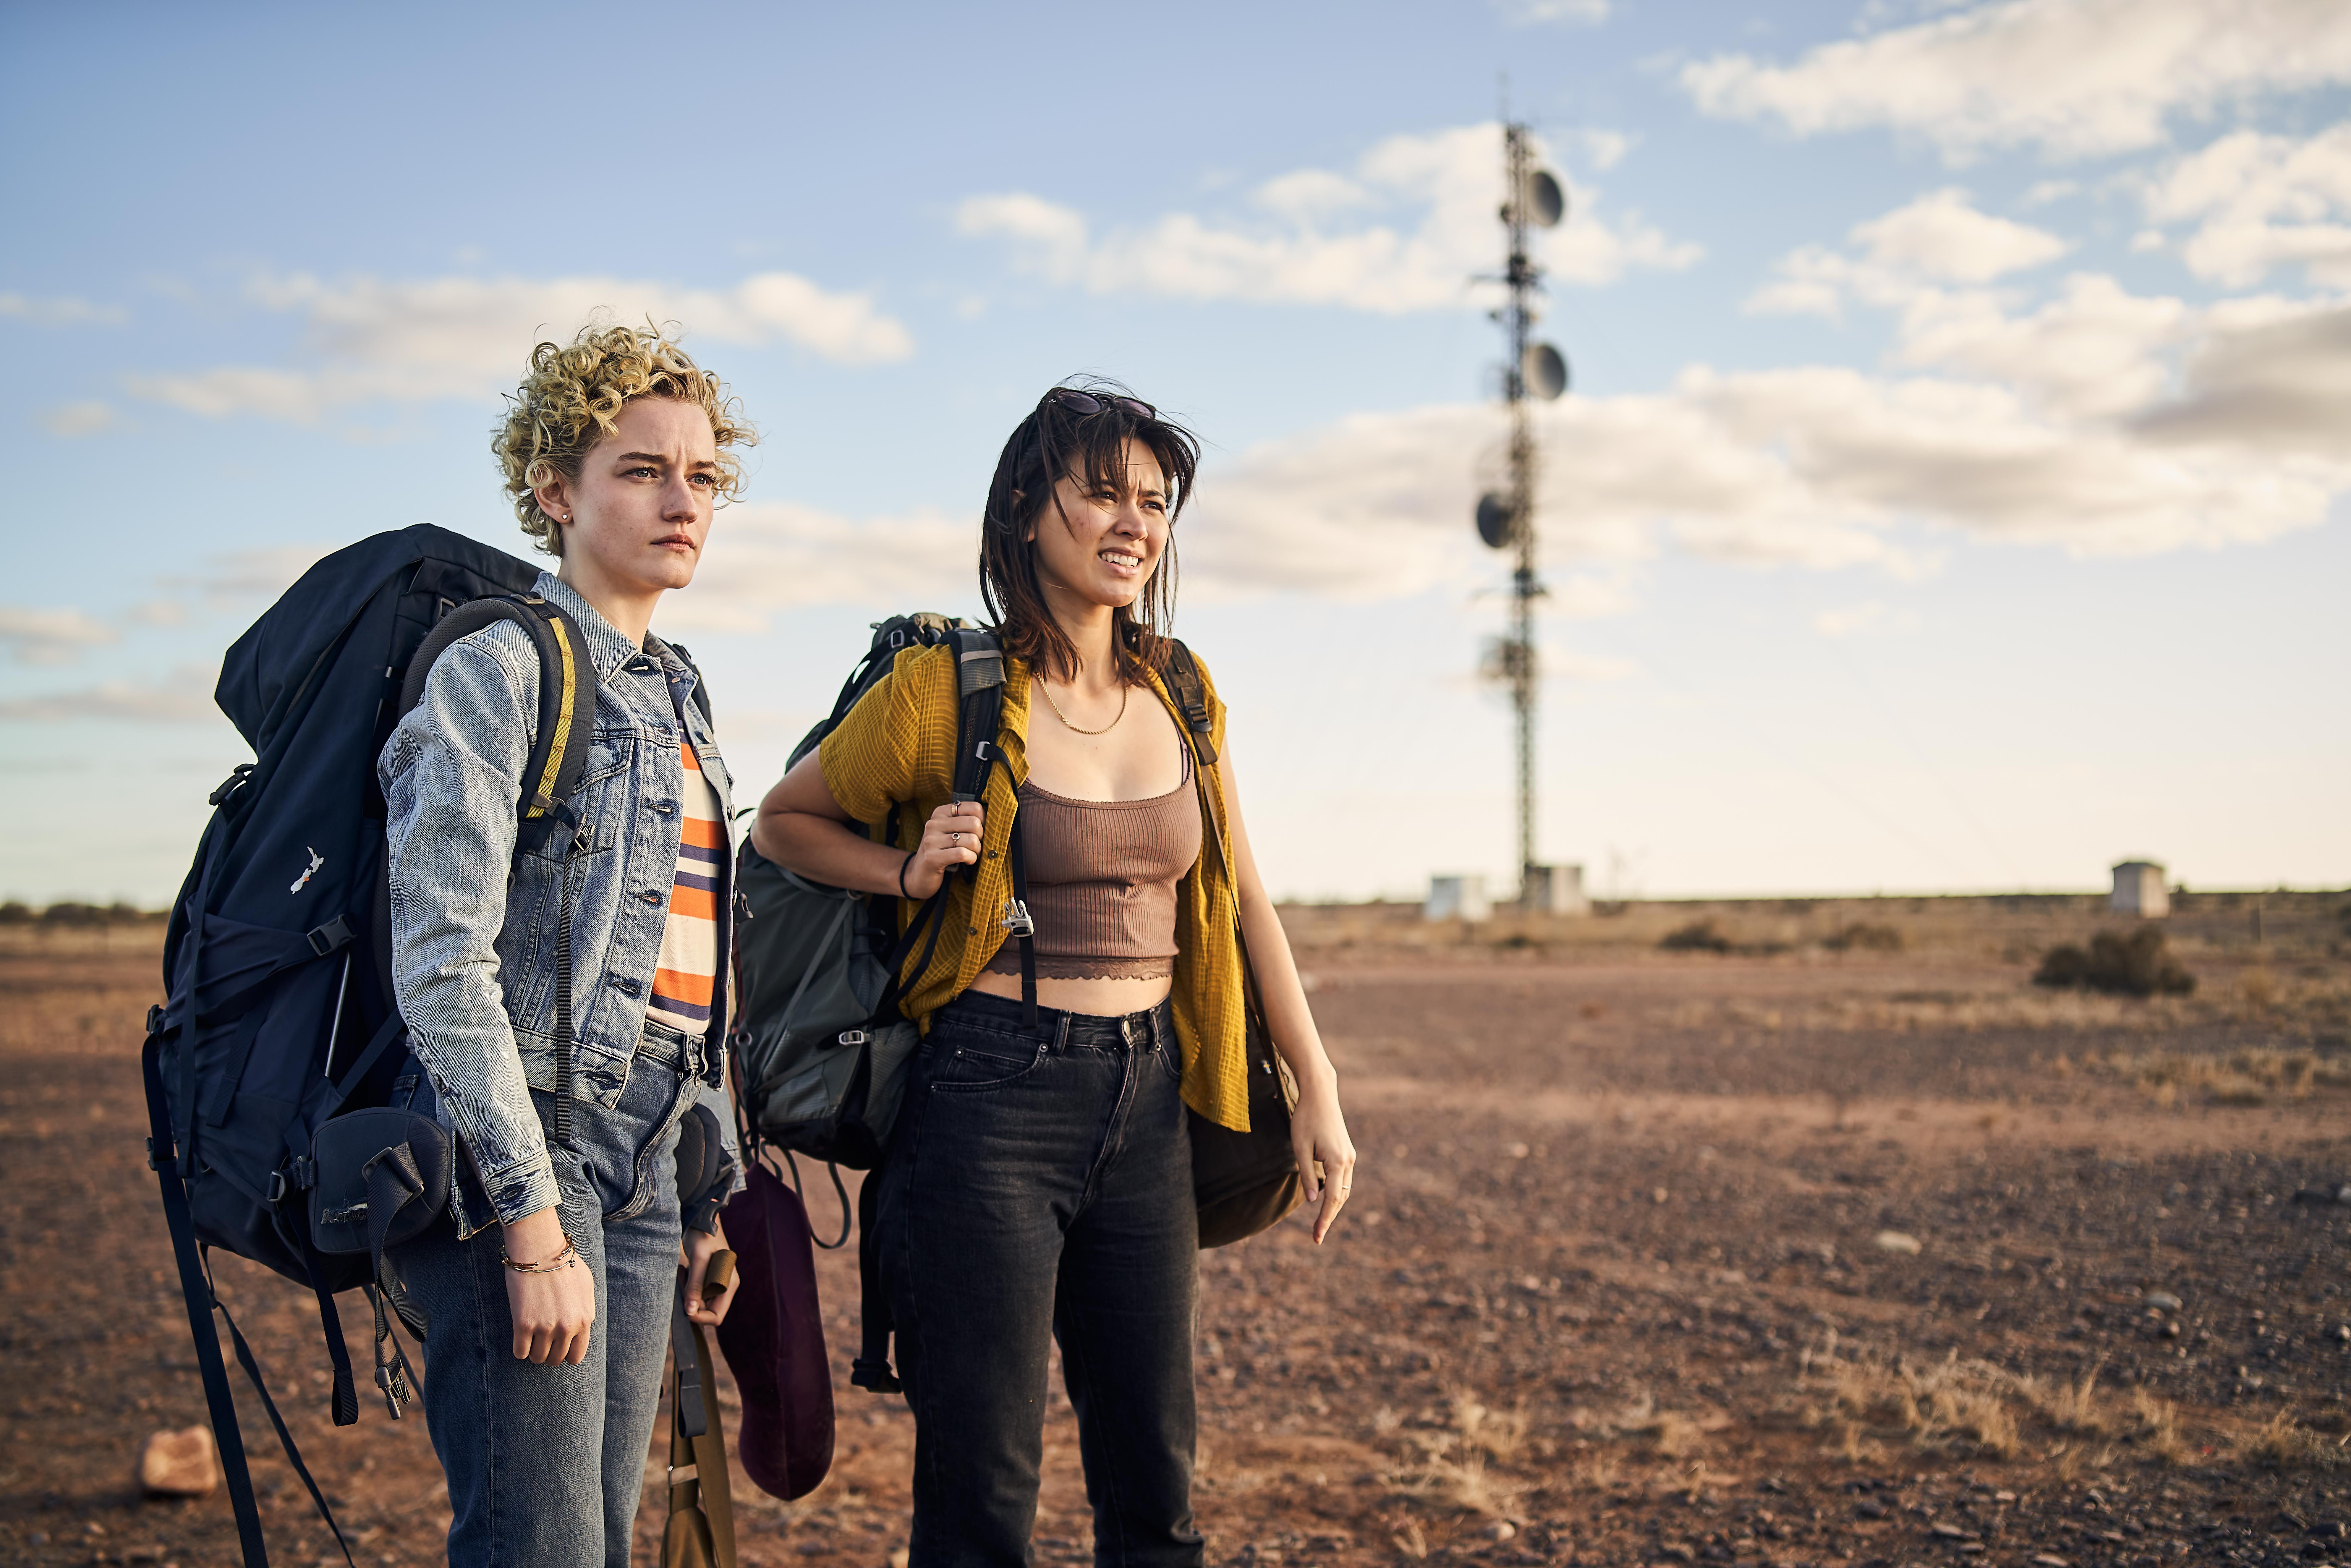 THE ROYAL HOTEL. A Feminist Vacation Thriller in the Australian Outback [REVIEW]